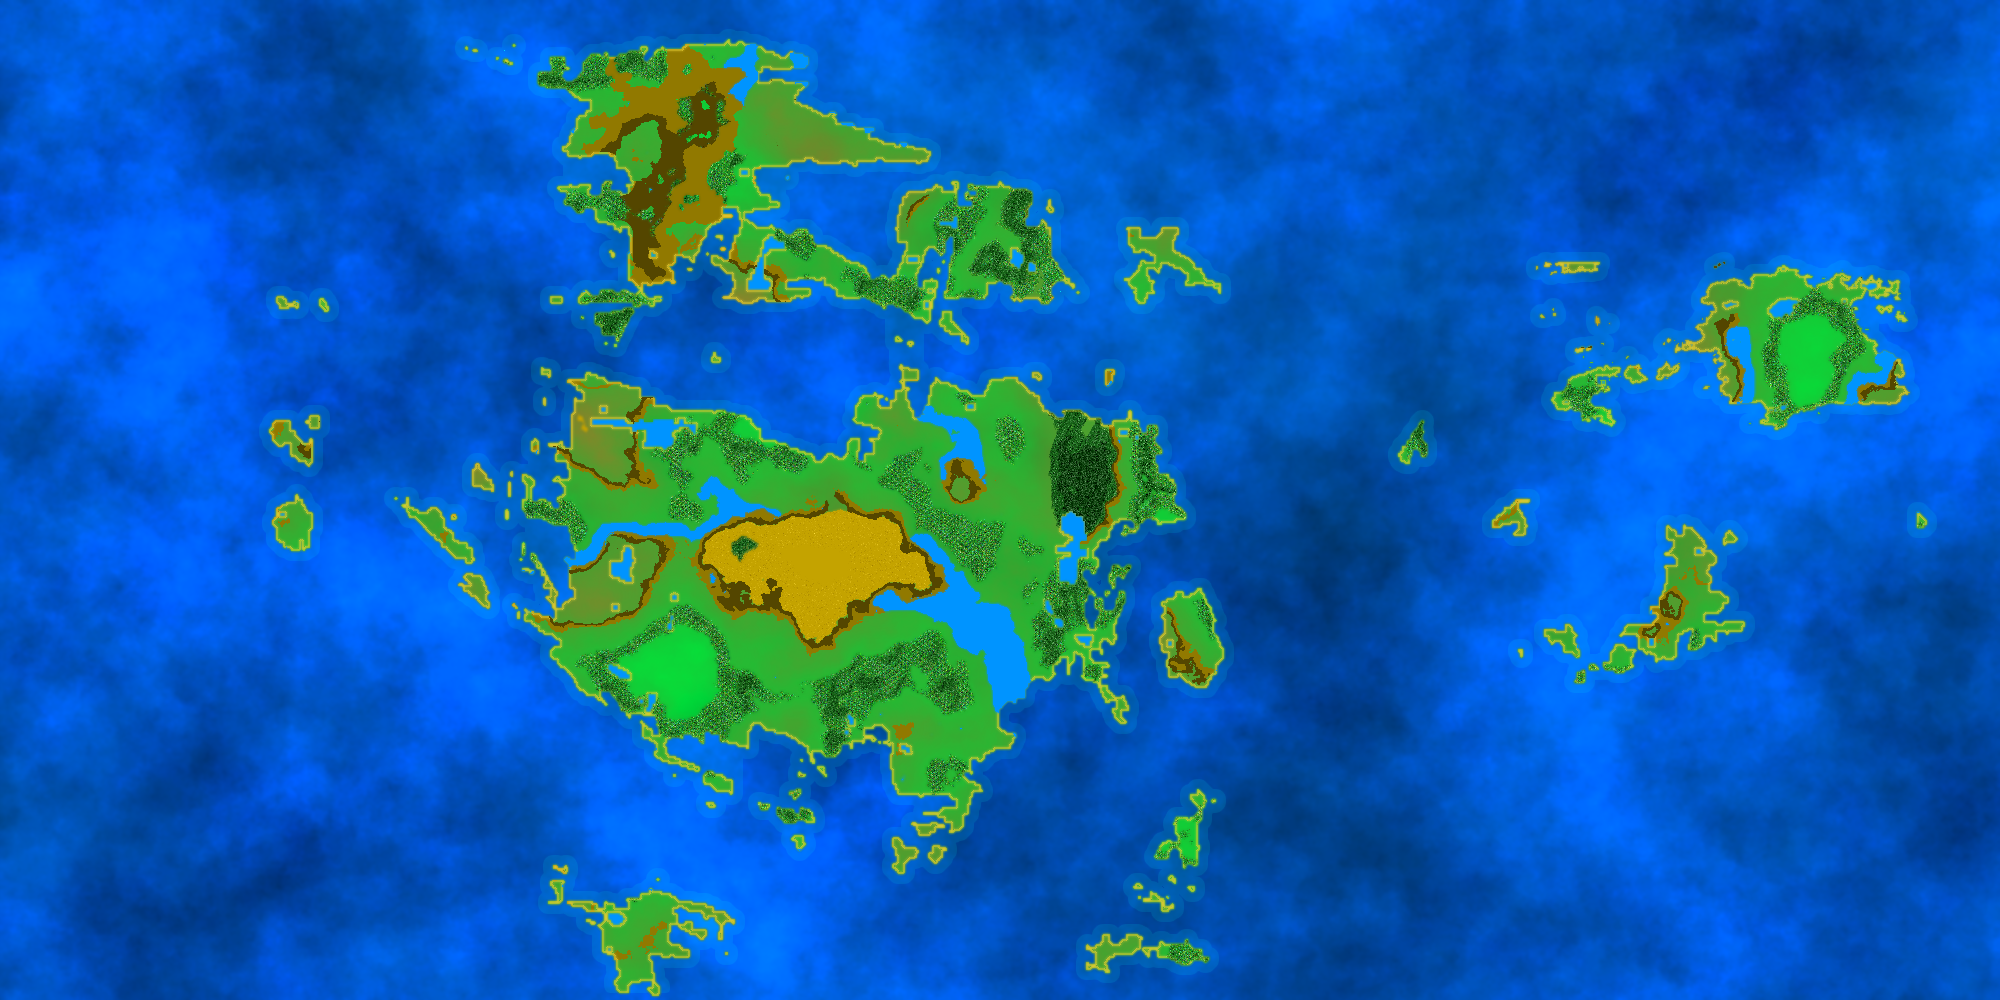 Worldbuilding Map 1 -- Proof of Concept 2